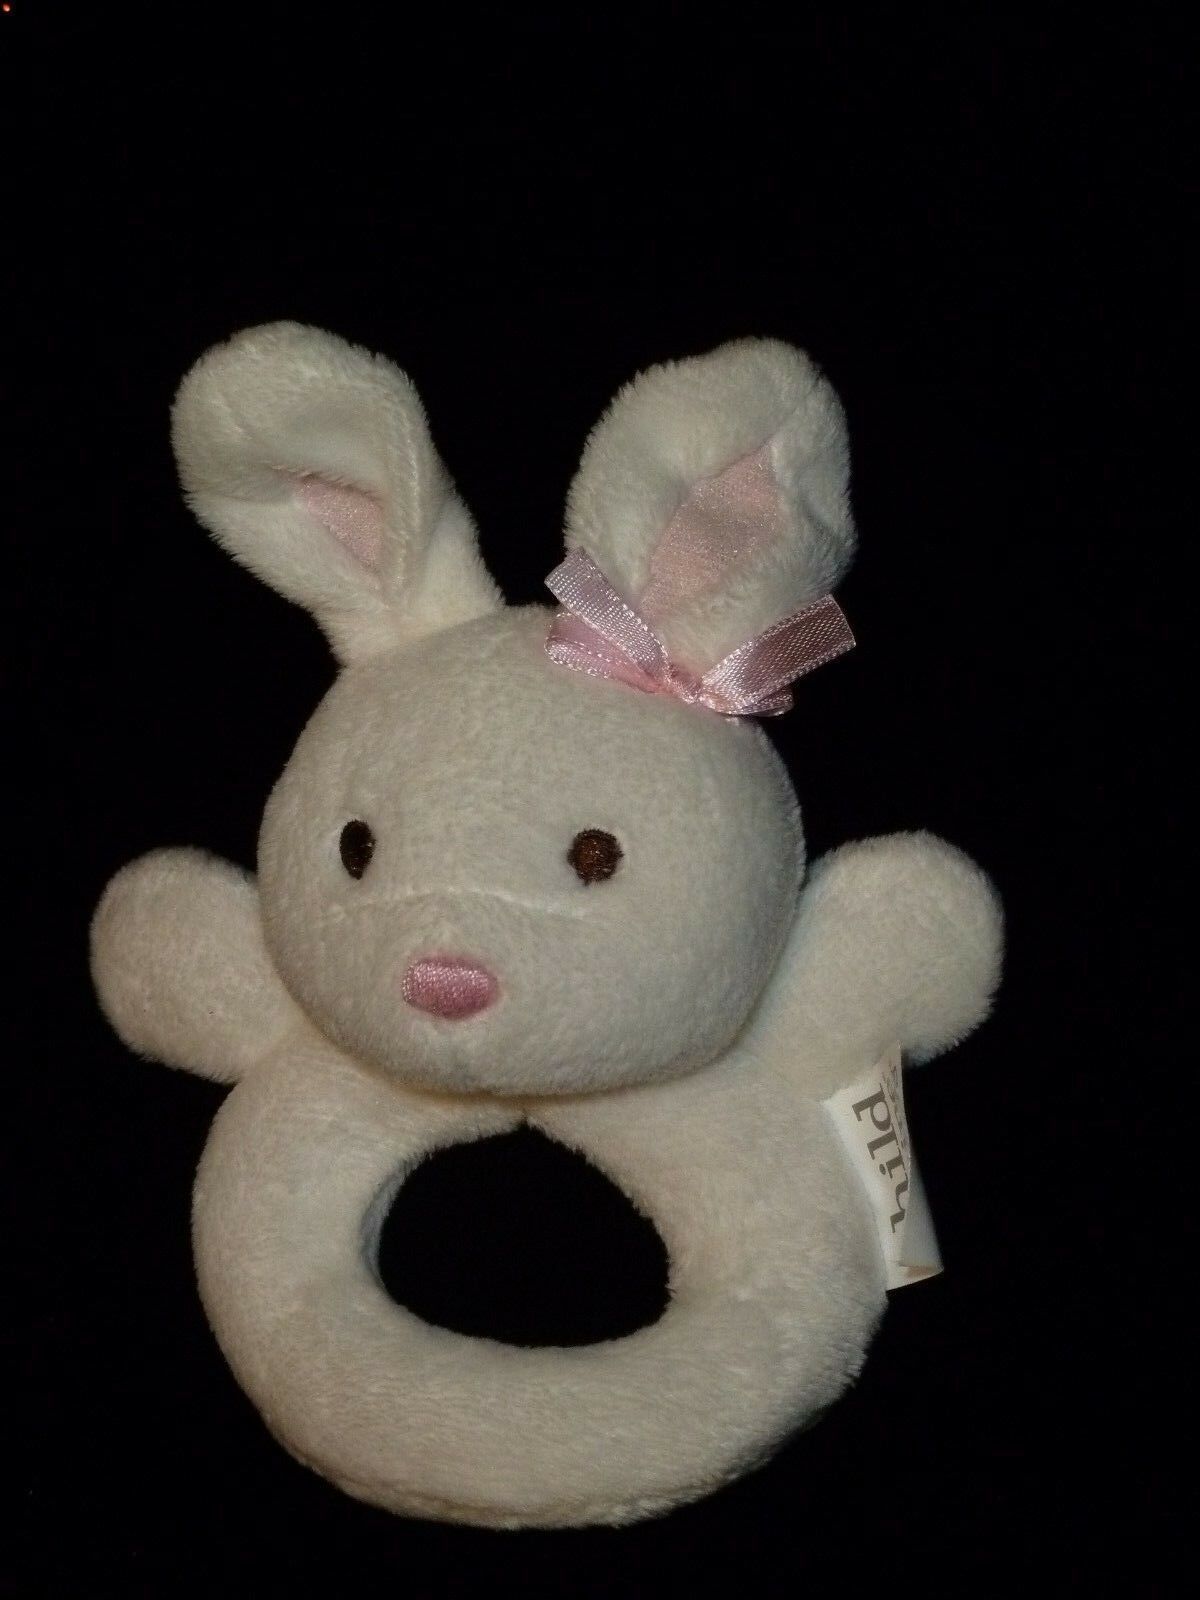 Primary image for CHILD OF MINE WHITE STUFFED PLUSH BABY TOY RING RATTLE PINK BOW BUNNY RABBIT